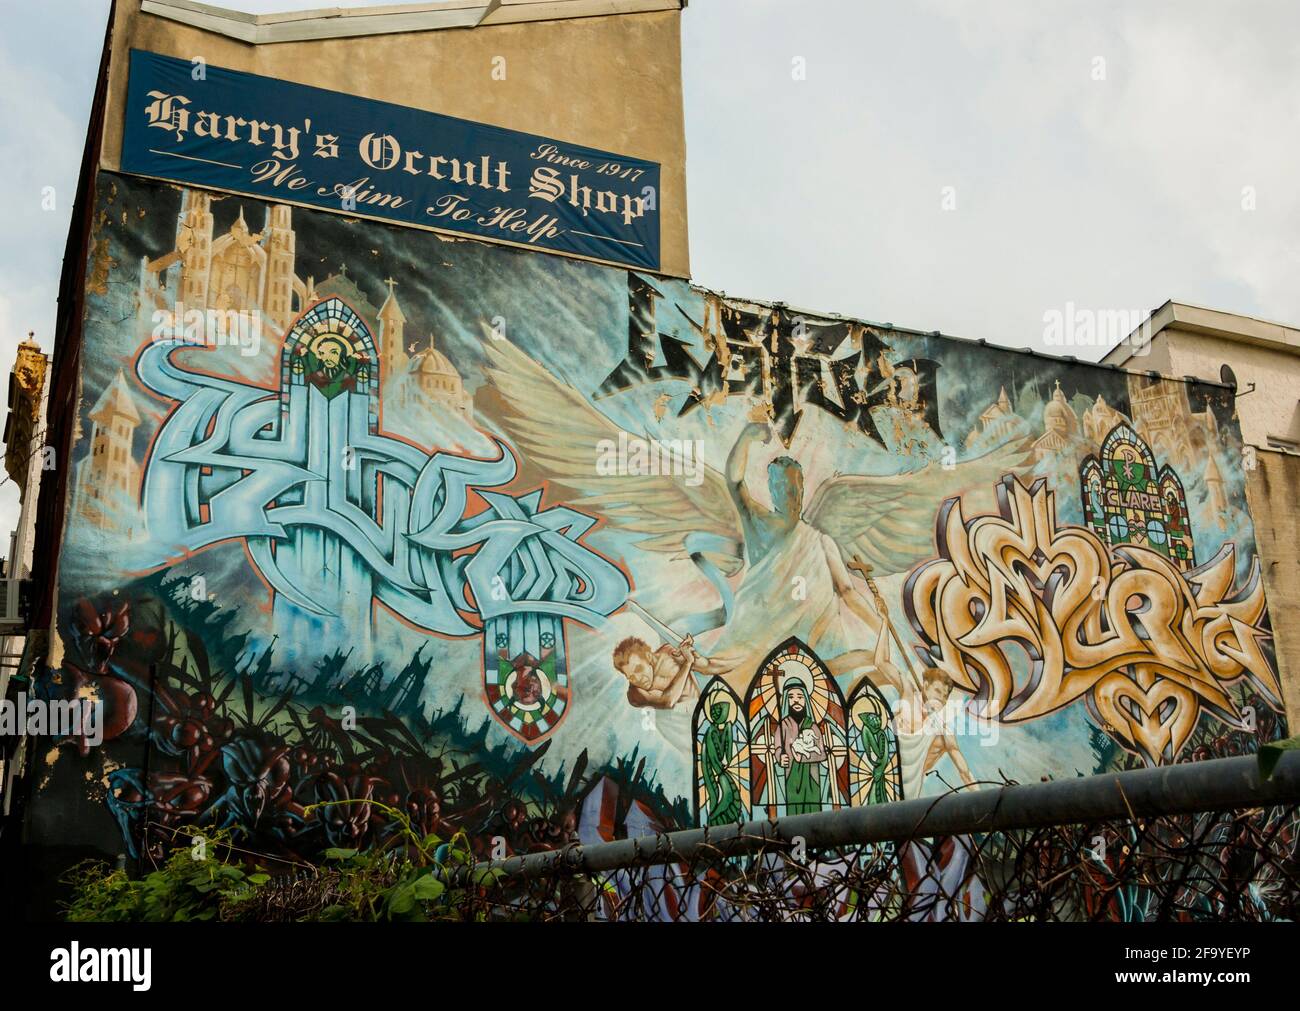 A public artwork / mural painted on the side of Harry's Occult Shop in South Street, Philadelphia. The store has been demolished since this 2009 image. Stock Photo